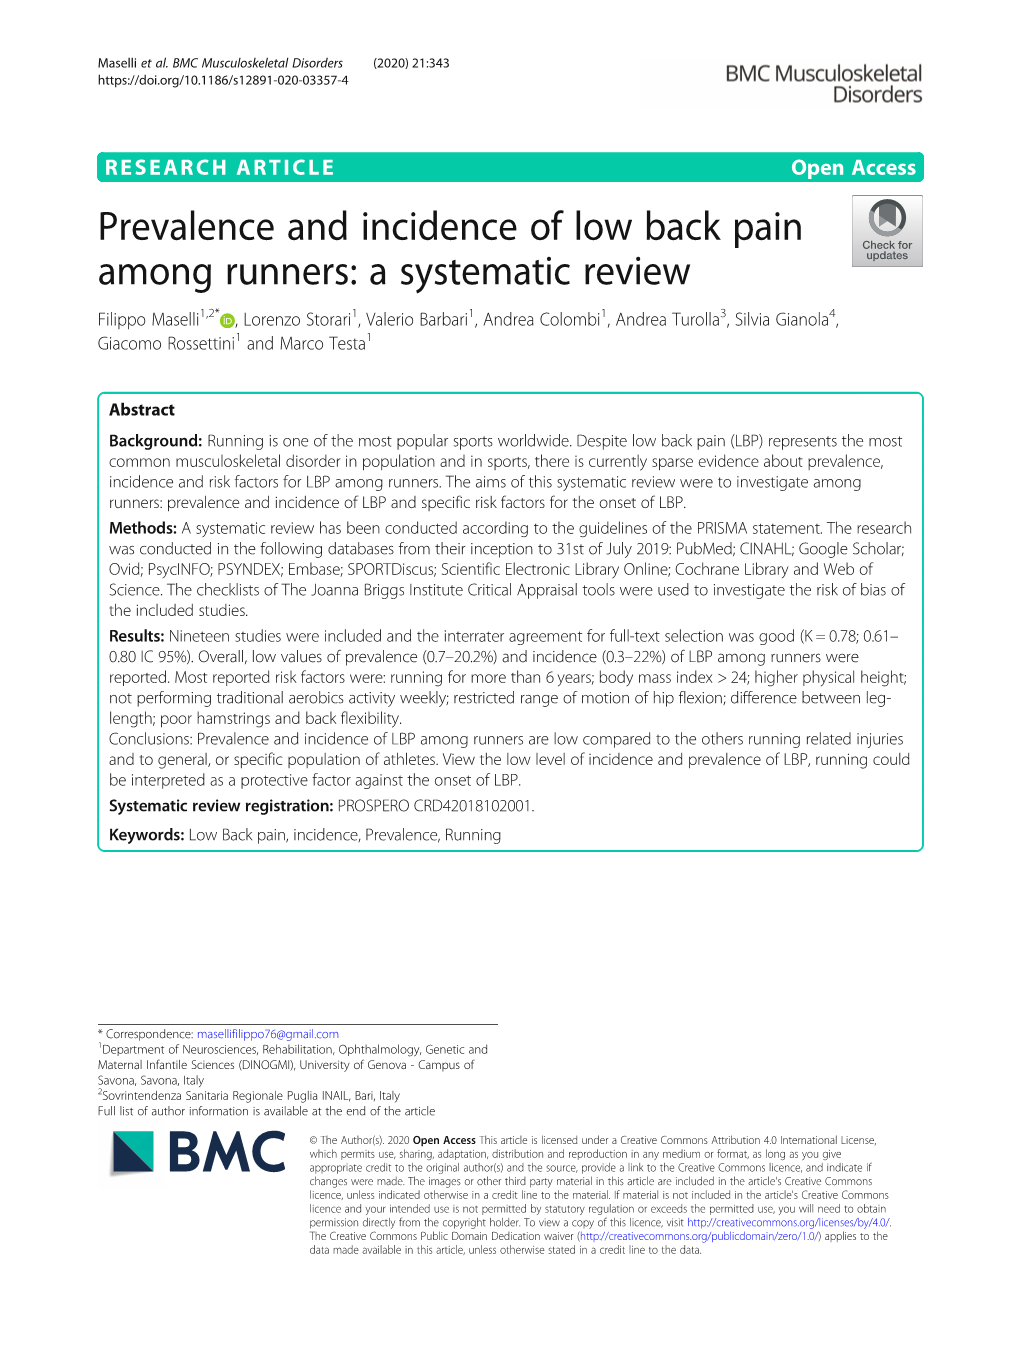 Prevalence and Incidence of Low Back Pain Among Runners